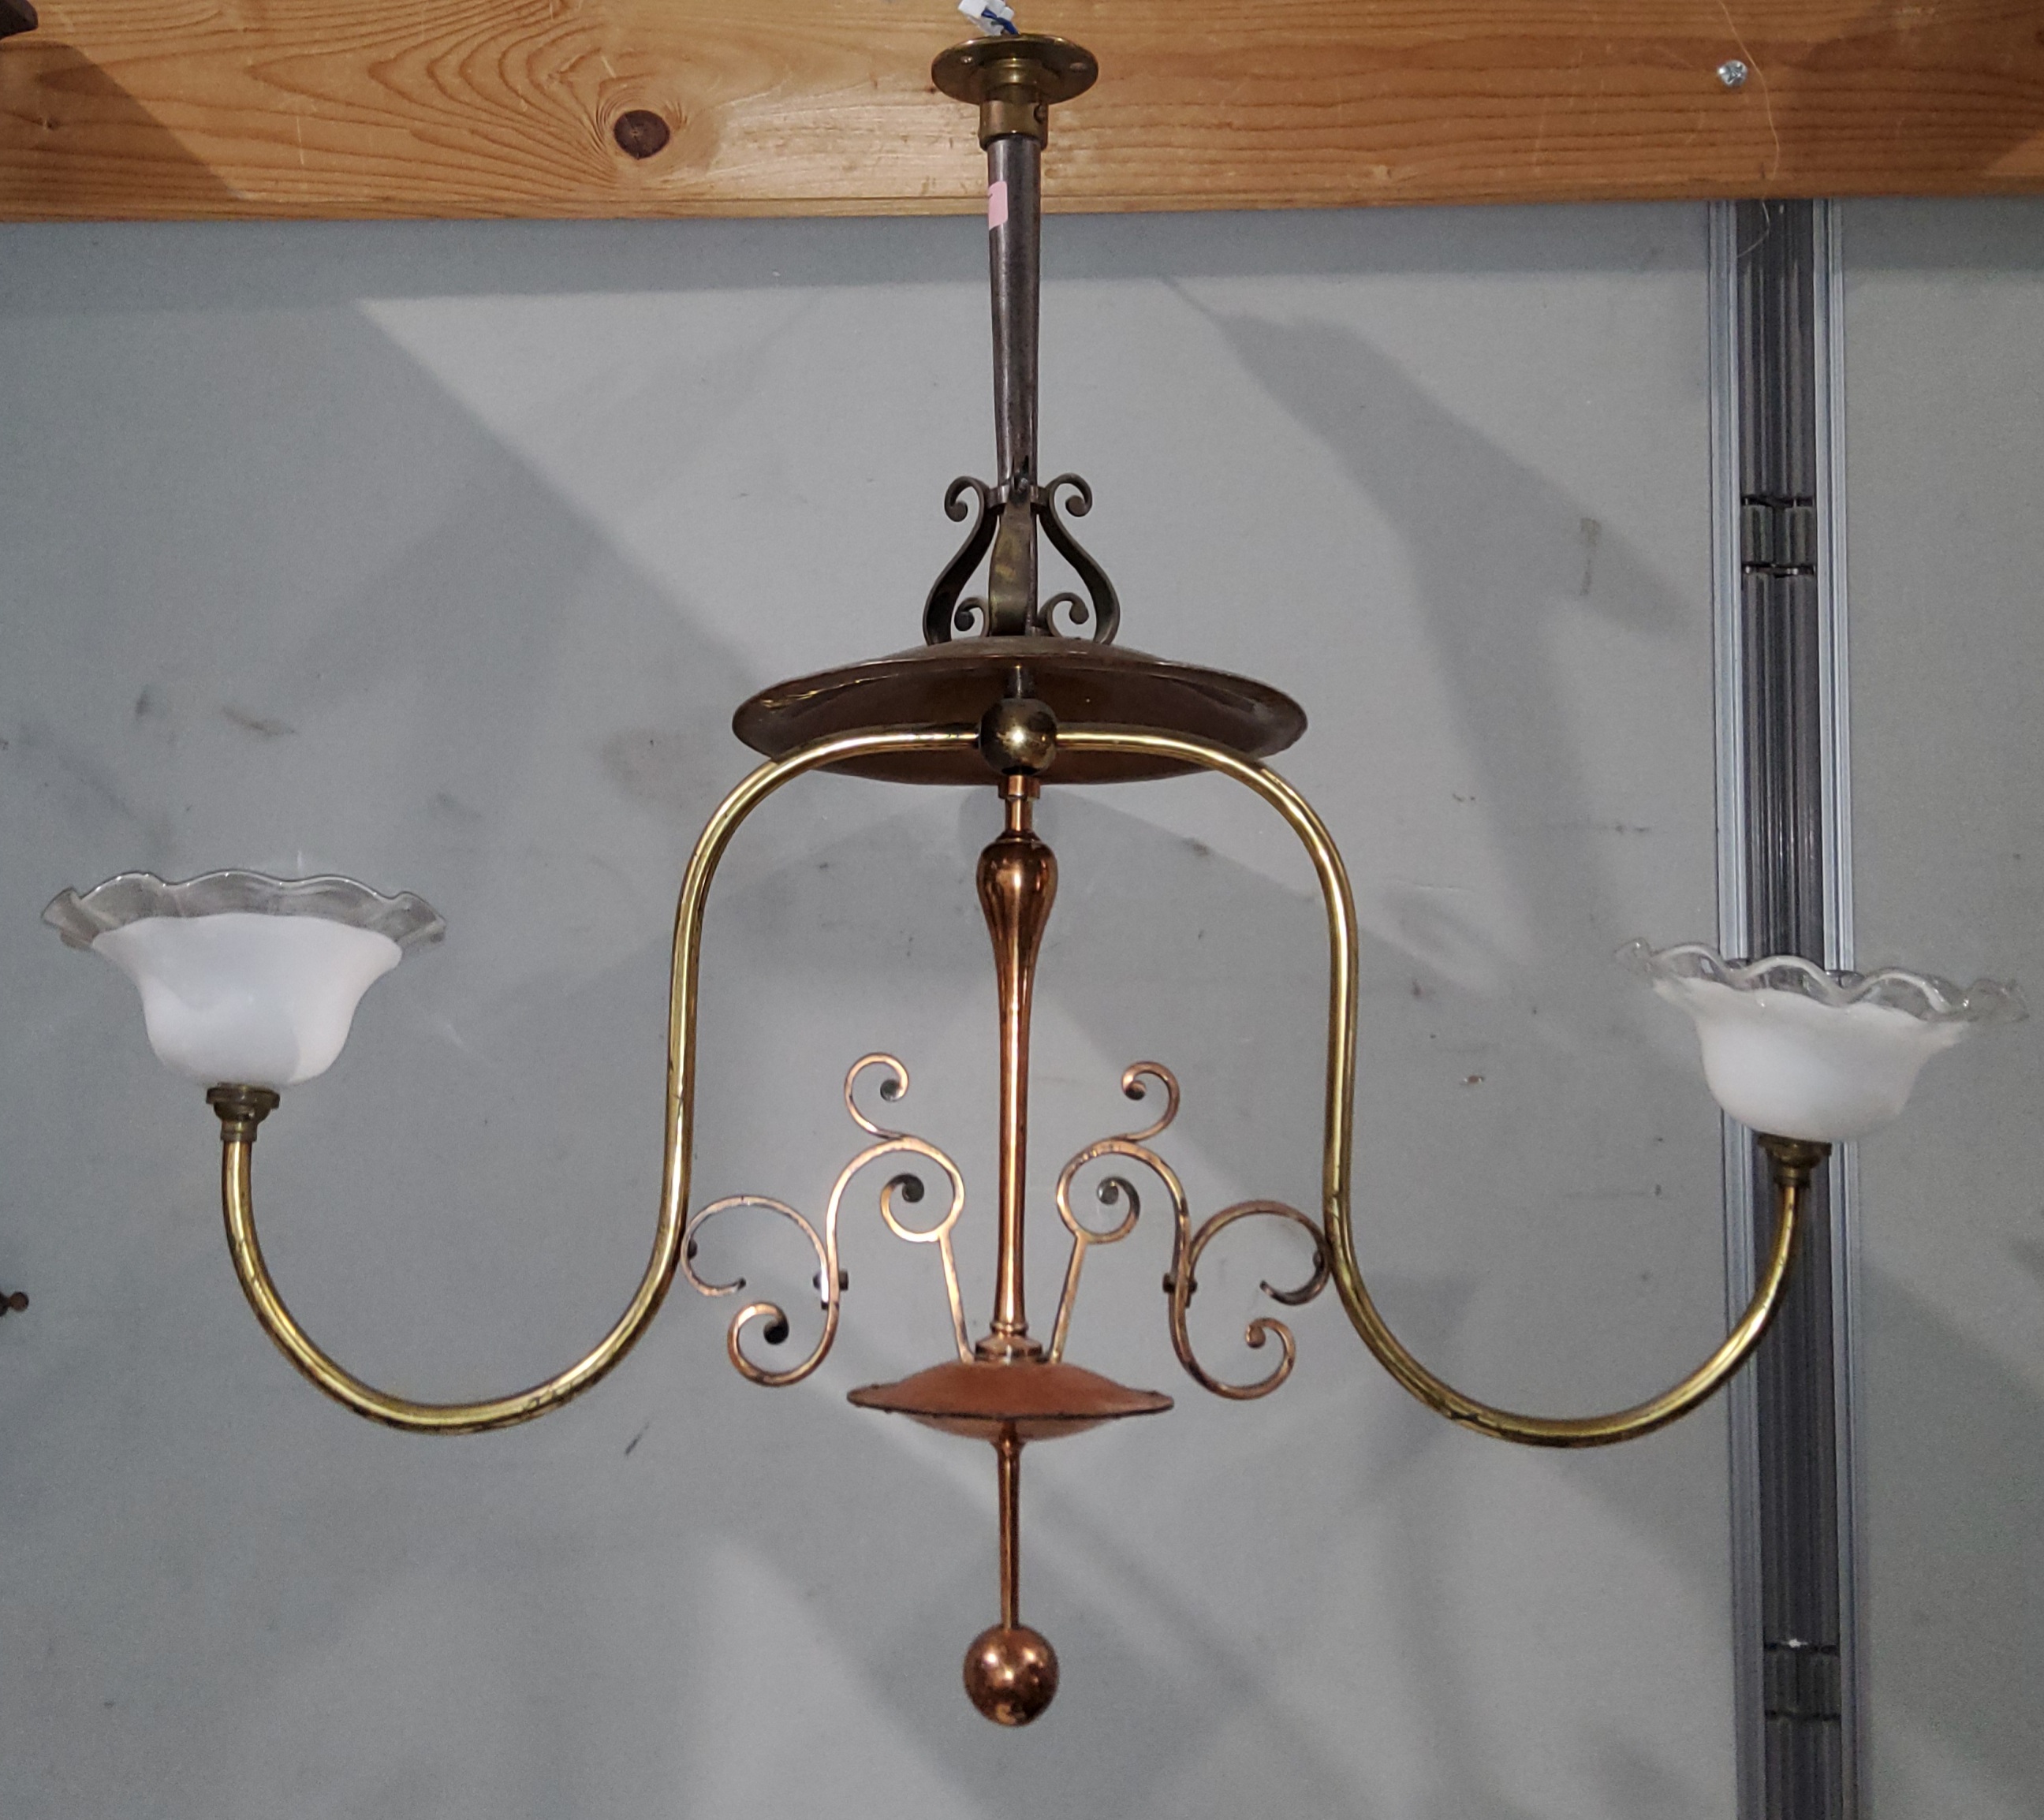 An early 20th century pendant ceiling light, Arts & Crafts design, copper and brass with wrought